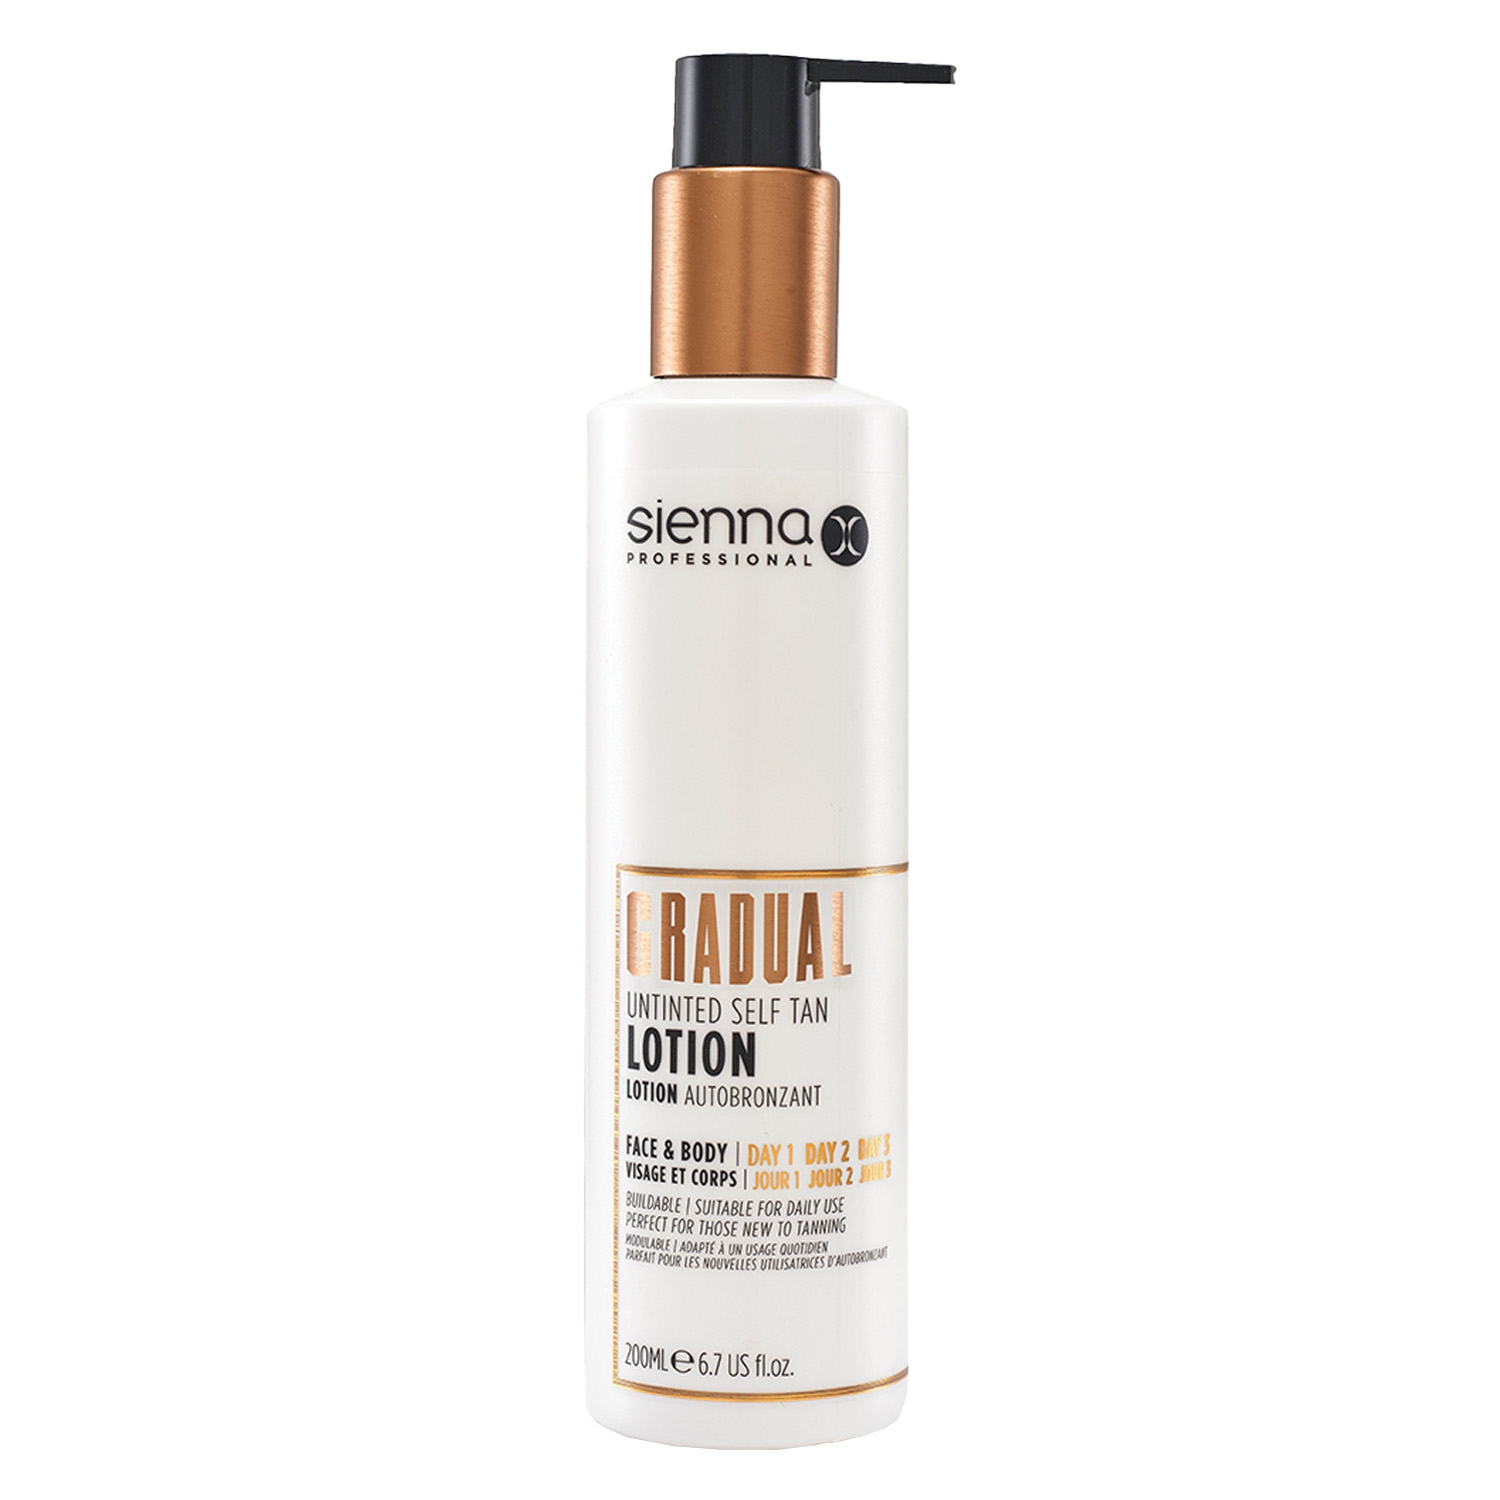 Product image from sienna x - Gradual Untinted Self Tan Lotion